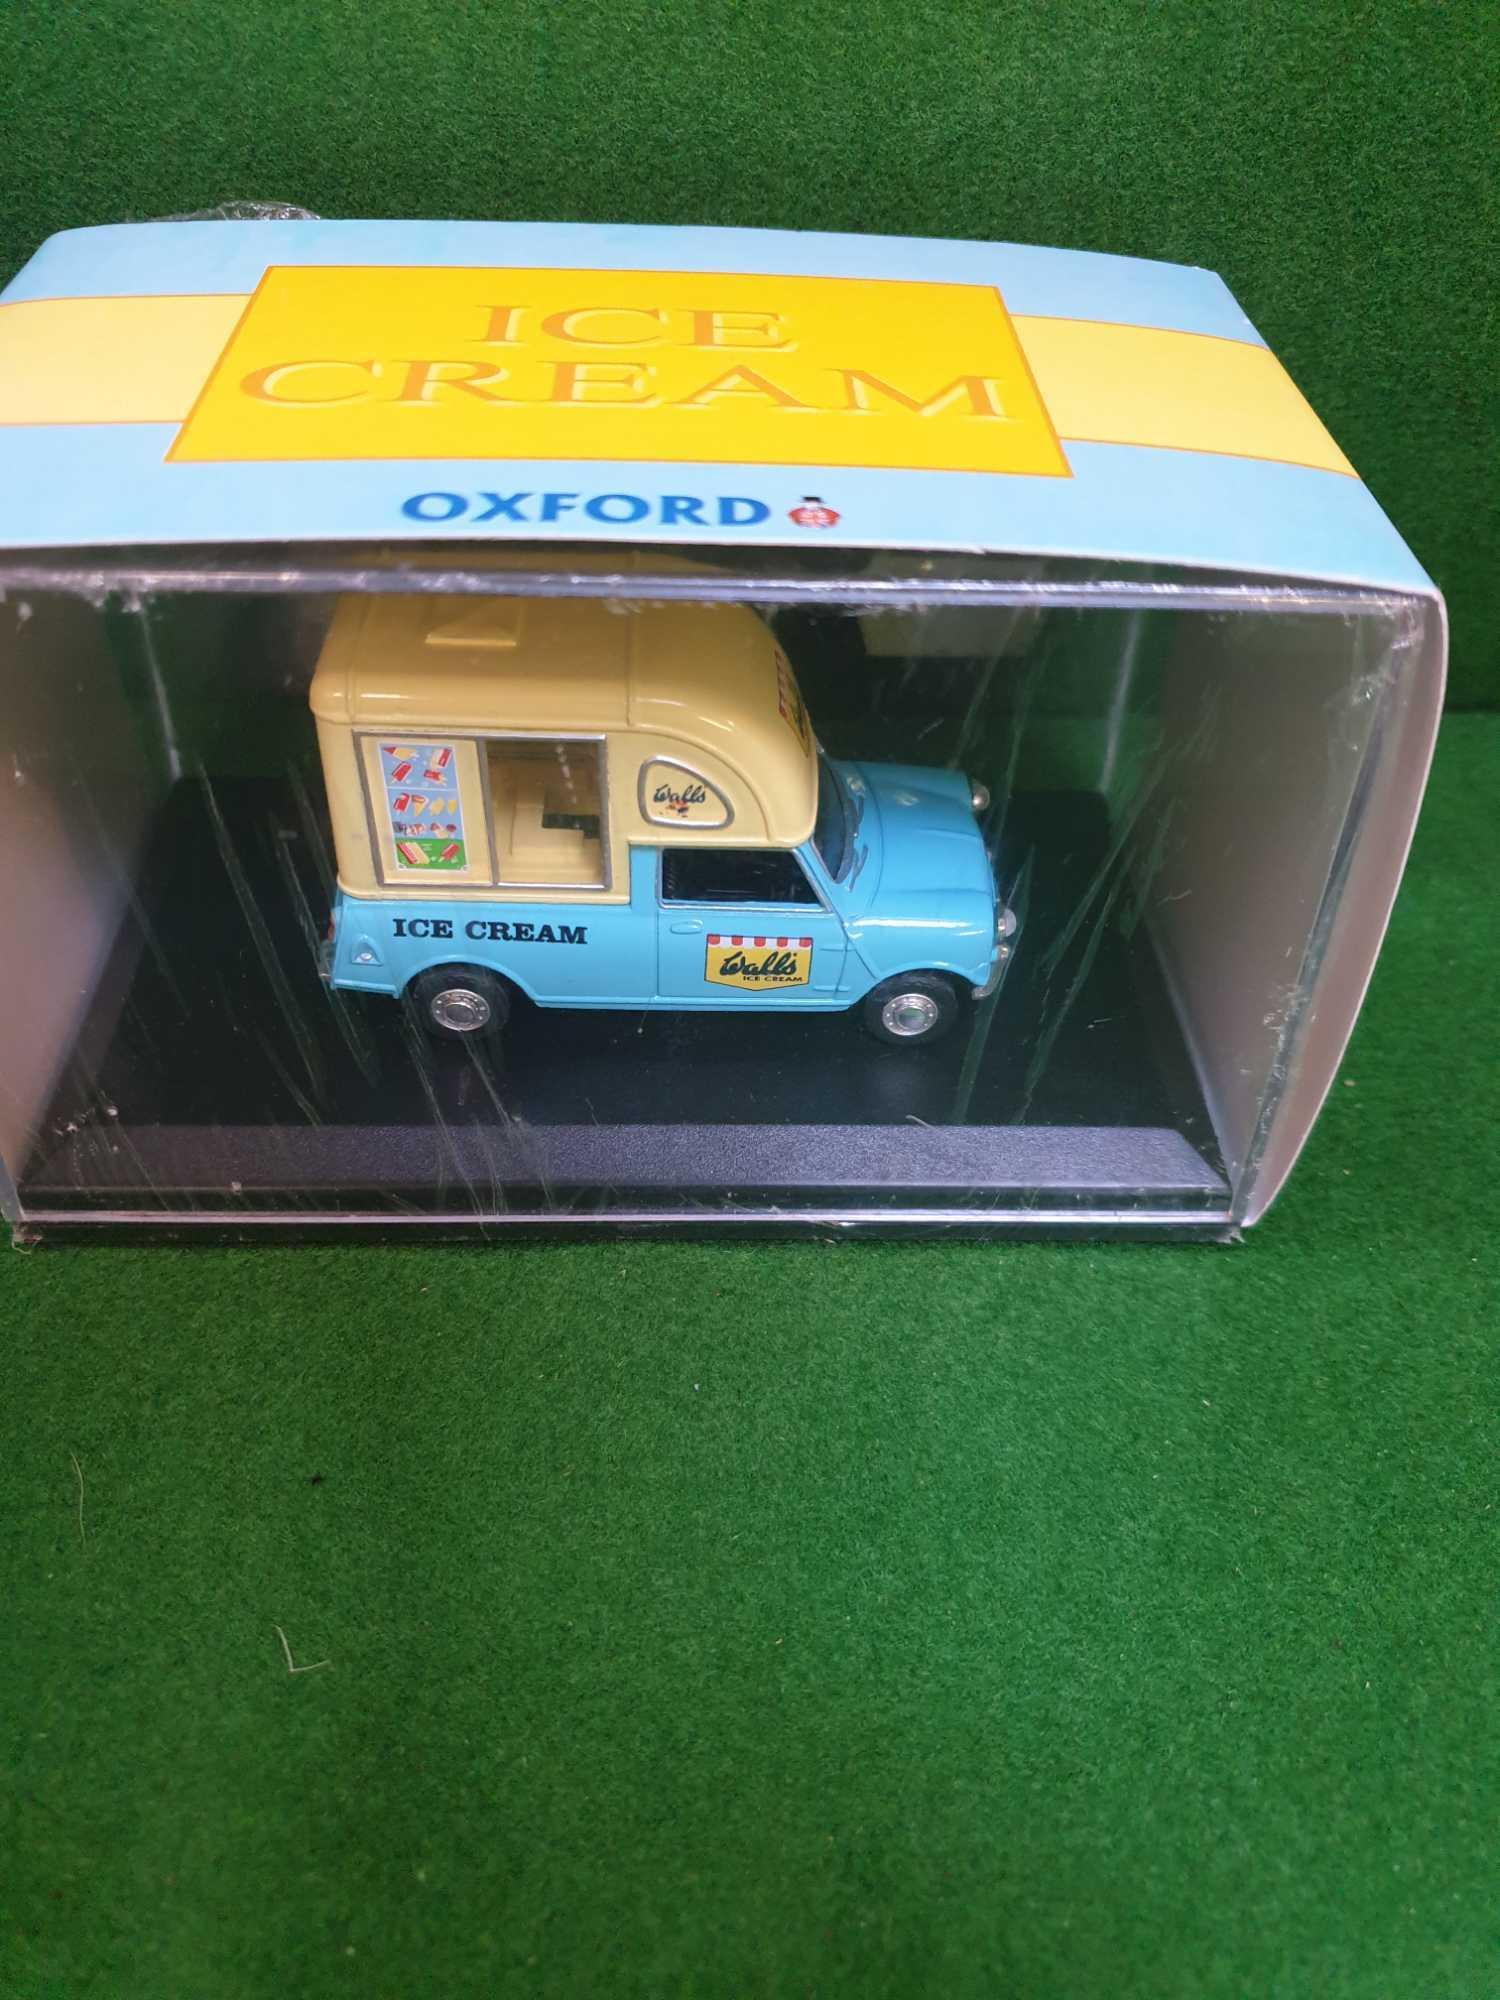 5x Oxford Road Show Diecast Models Comprising of #HA003 Oxford Diecast Walls Ice Cream - #CA002 - Image 4 of 5